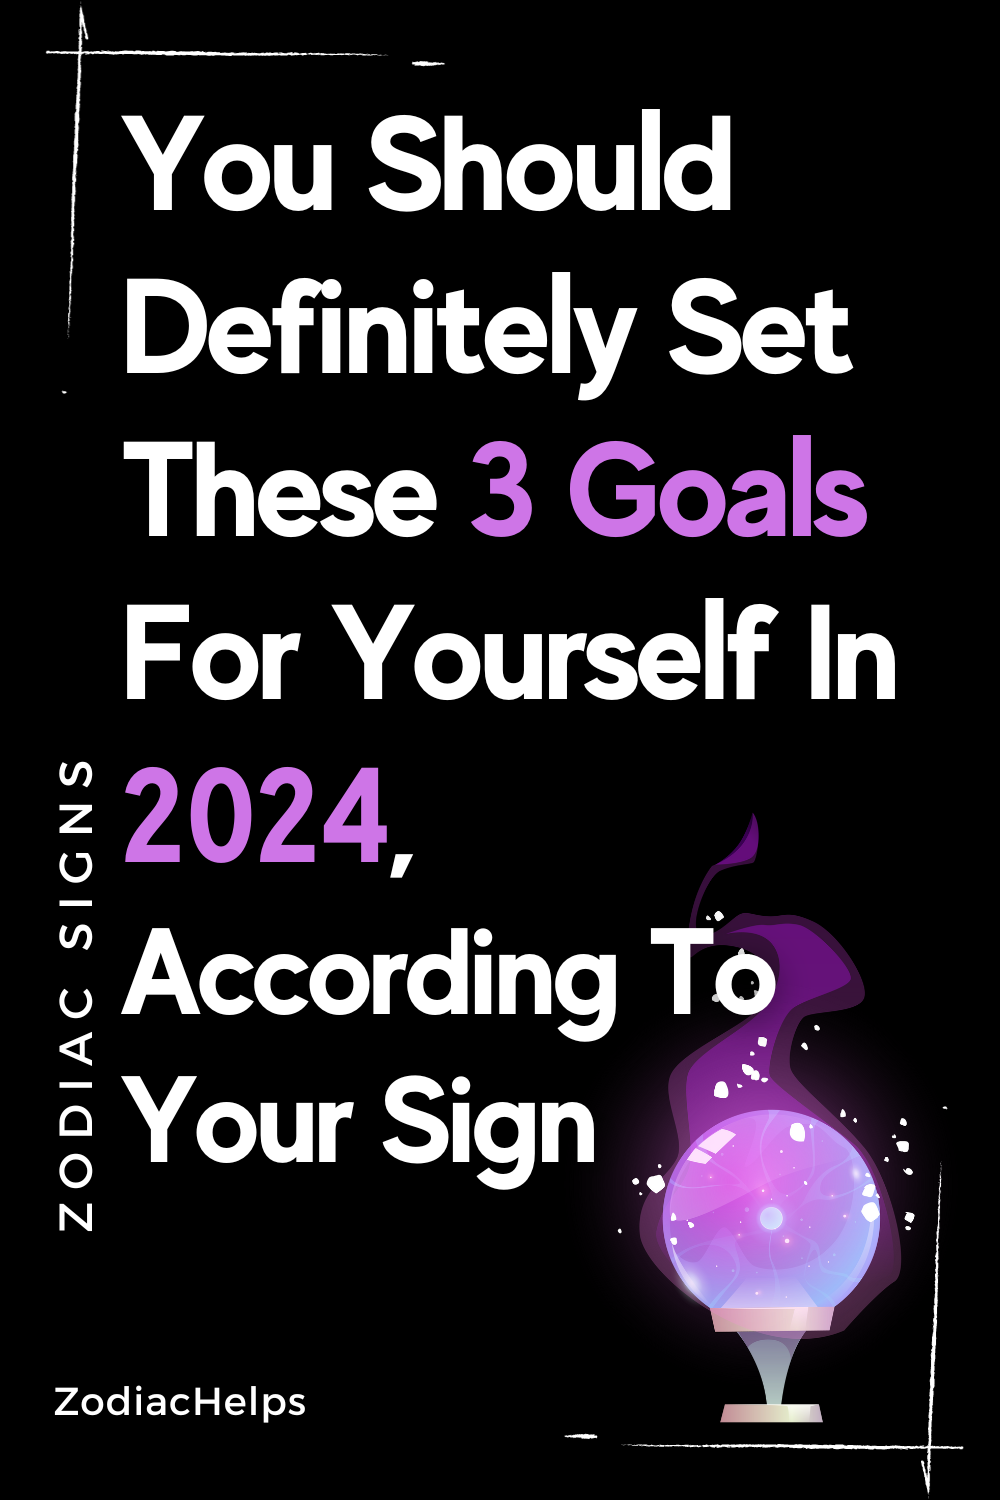 You Should Definitely Set These 3 Goals For Yourself In 2024, According To Your Sign